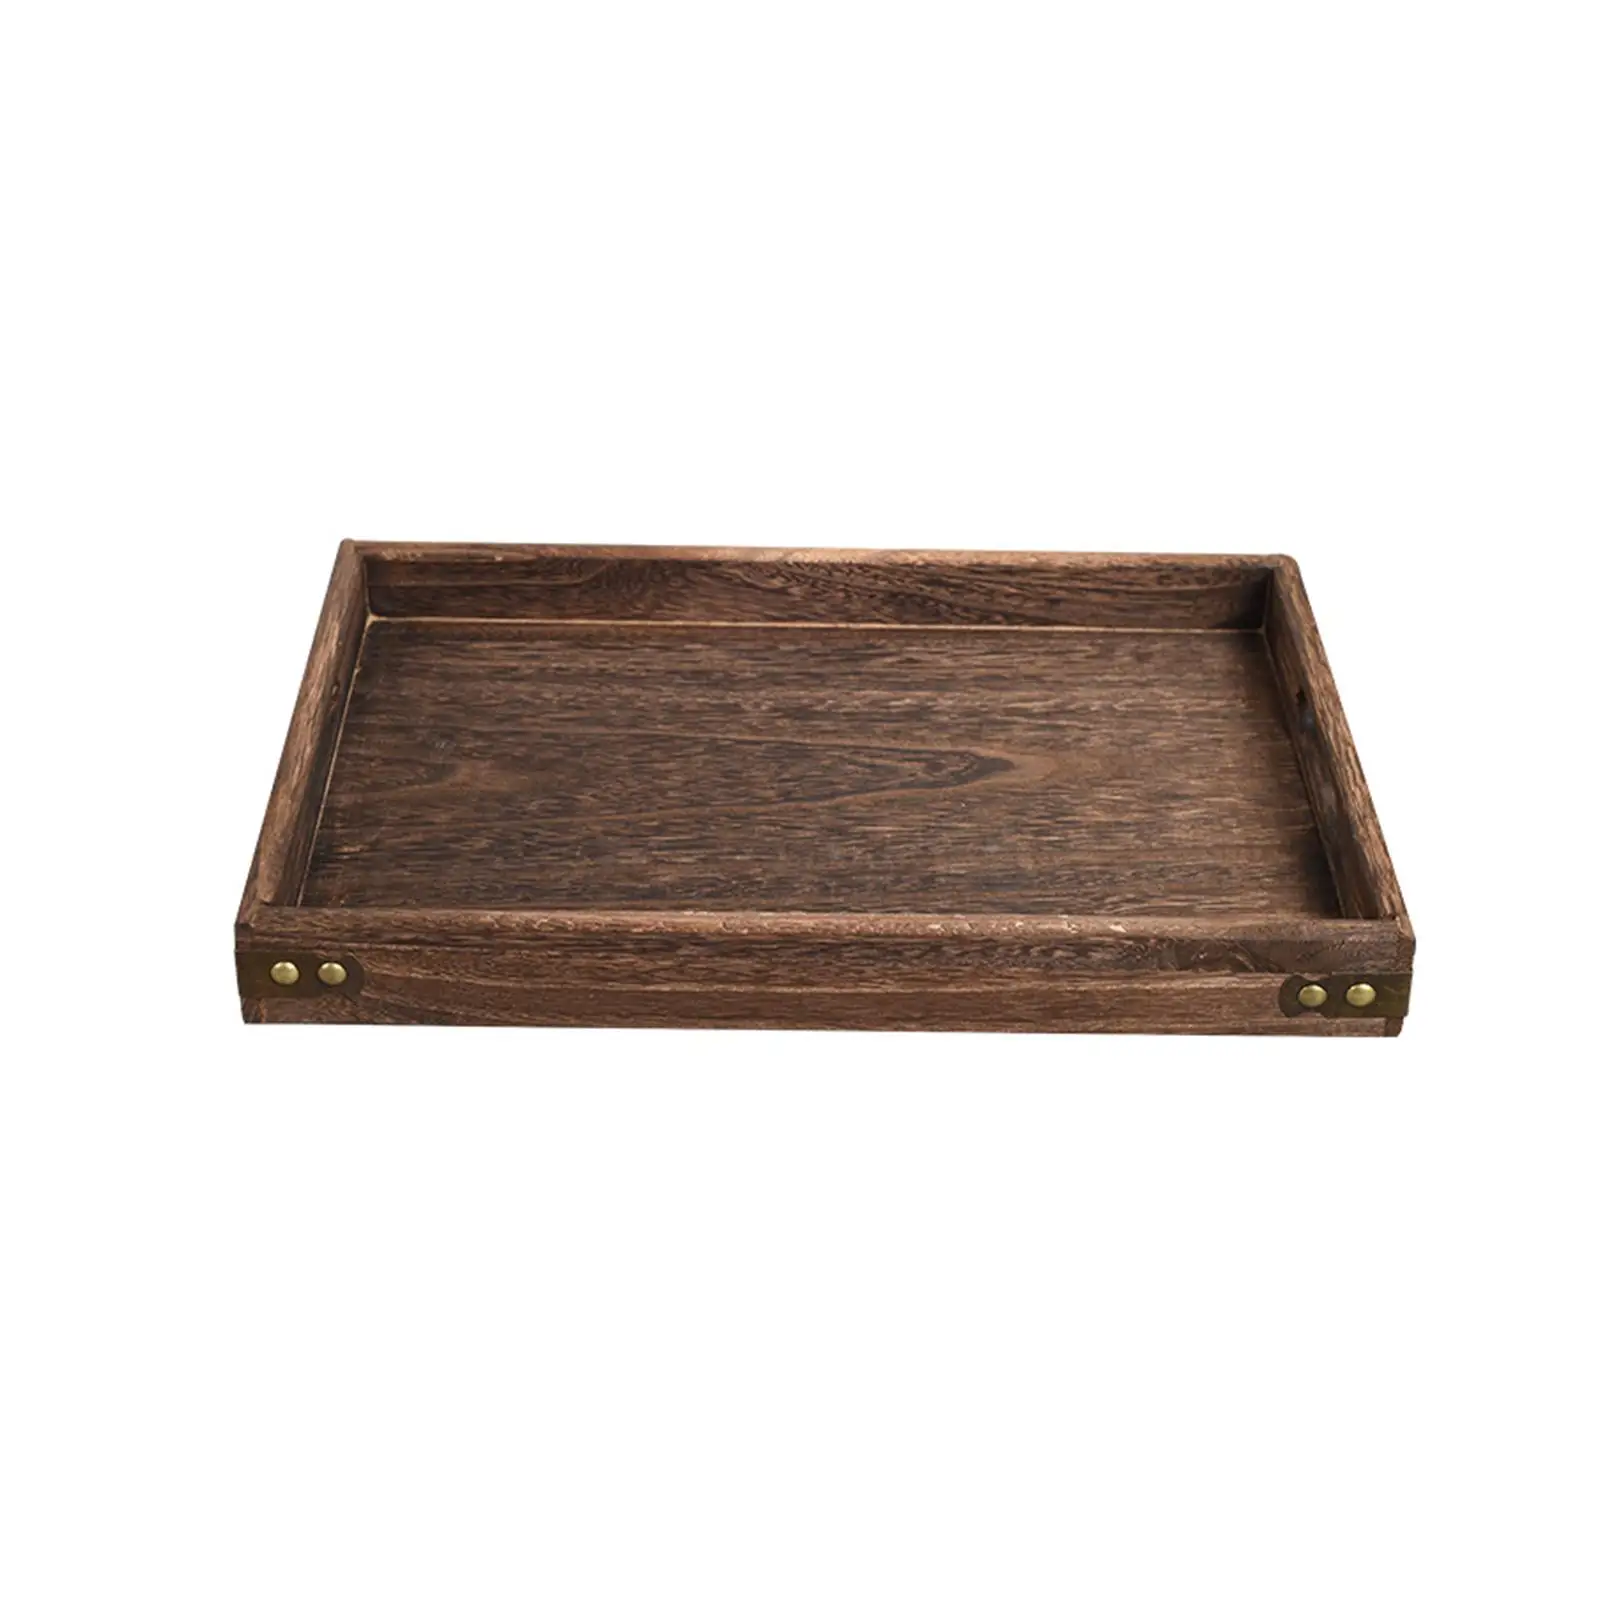 Rustic Wood Serving Tray Platter Eating Tray for Homes, Hotels, Bars Serving Pastries, Snacks, Coffee, Tea Multipurpose Sturdy